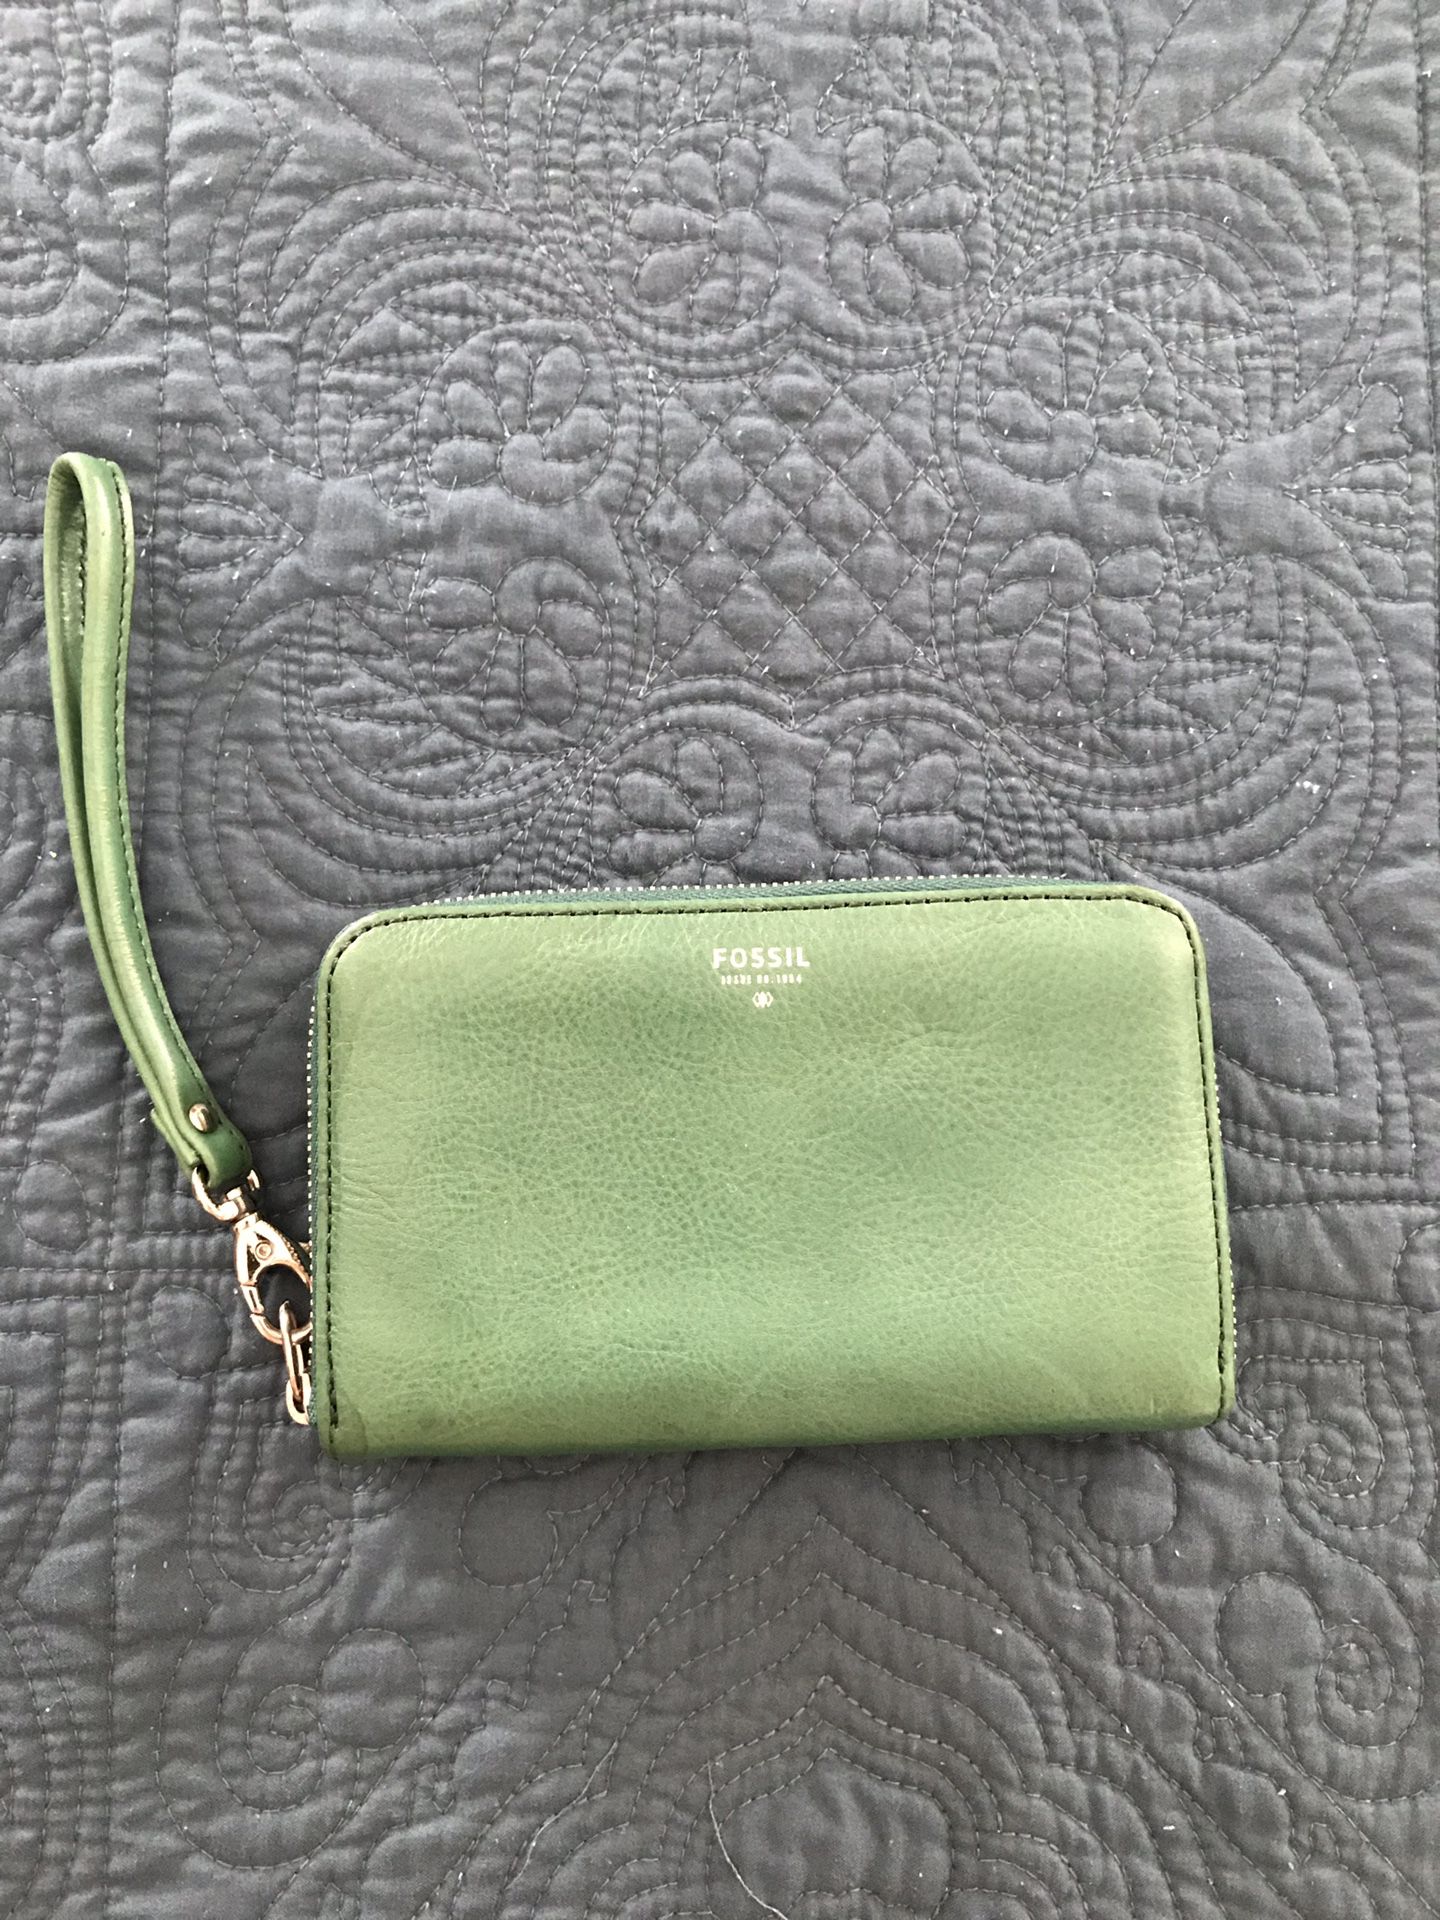 Brand new green leather Fossil wristlet